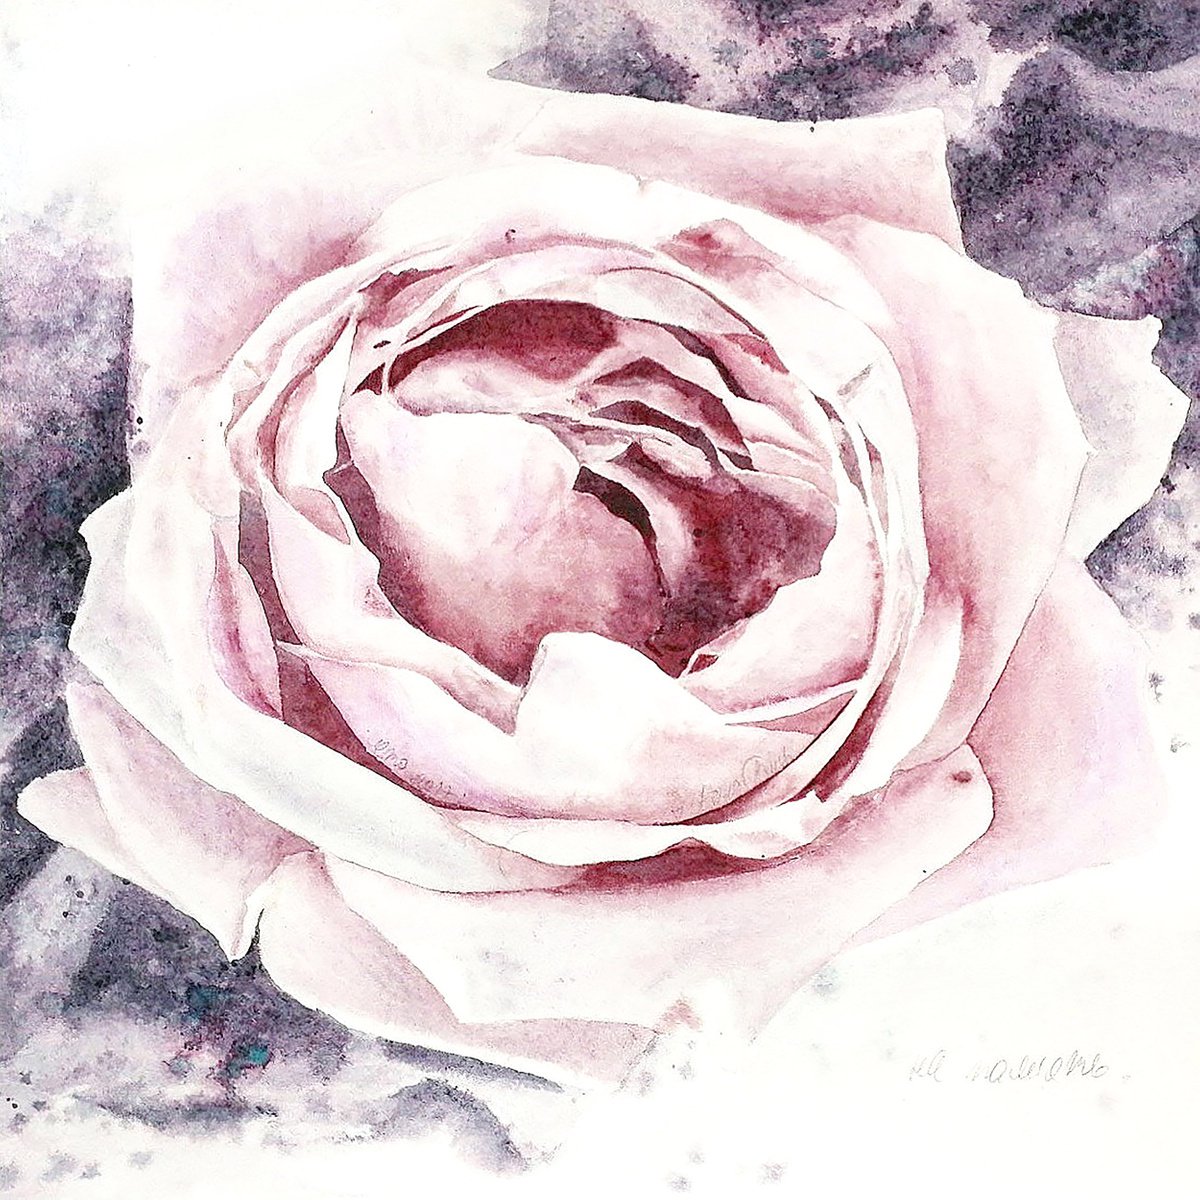 Terrific Fragrance Of The Rose - original floral watercolor painting by Alona Hryn